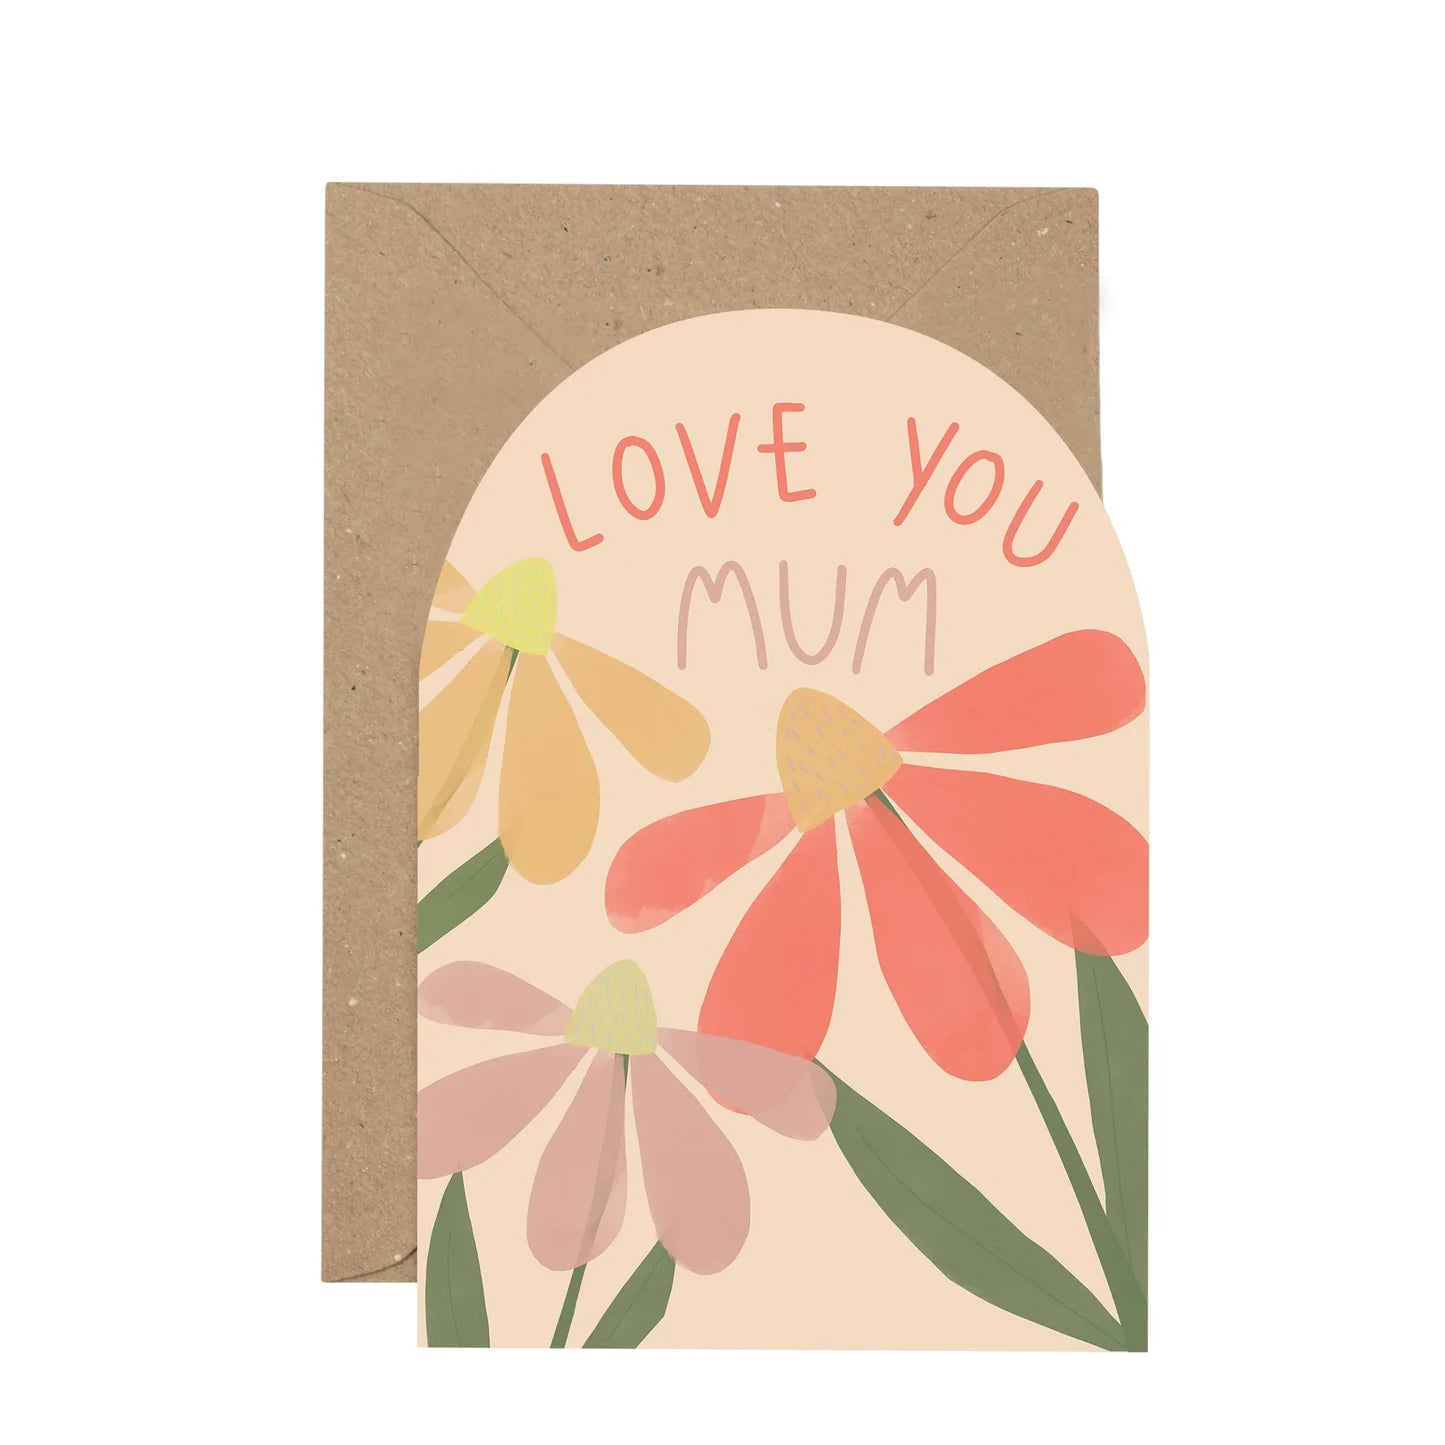 ‘Love you Mum’ Plewsy card - The Bristol Artisan Handmade Sustainable Gifts and Homewares.